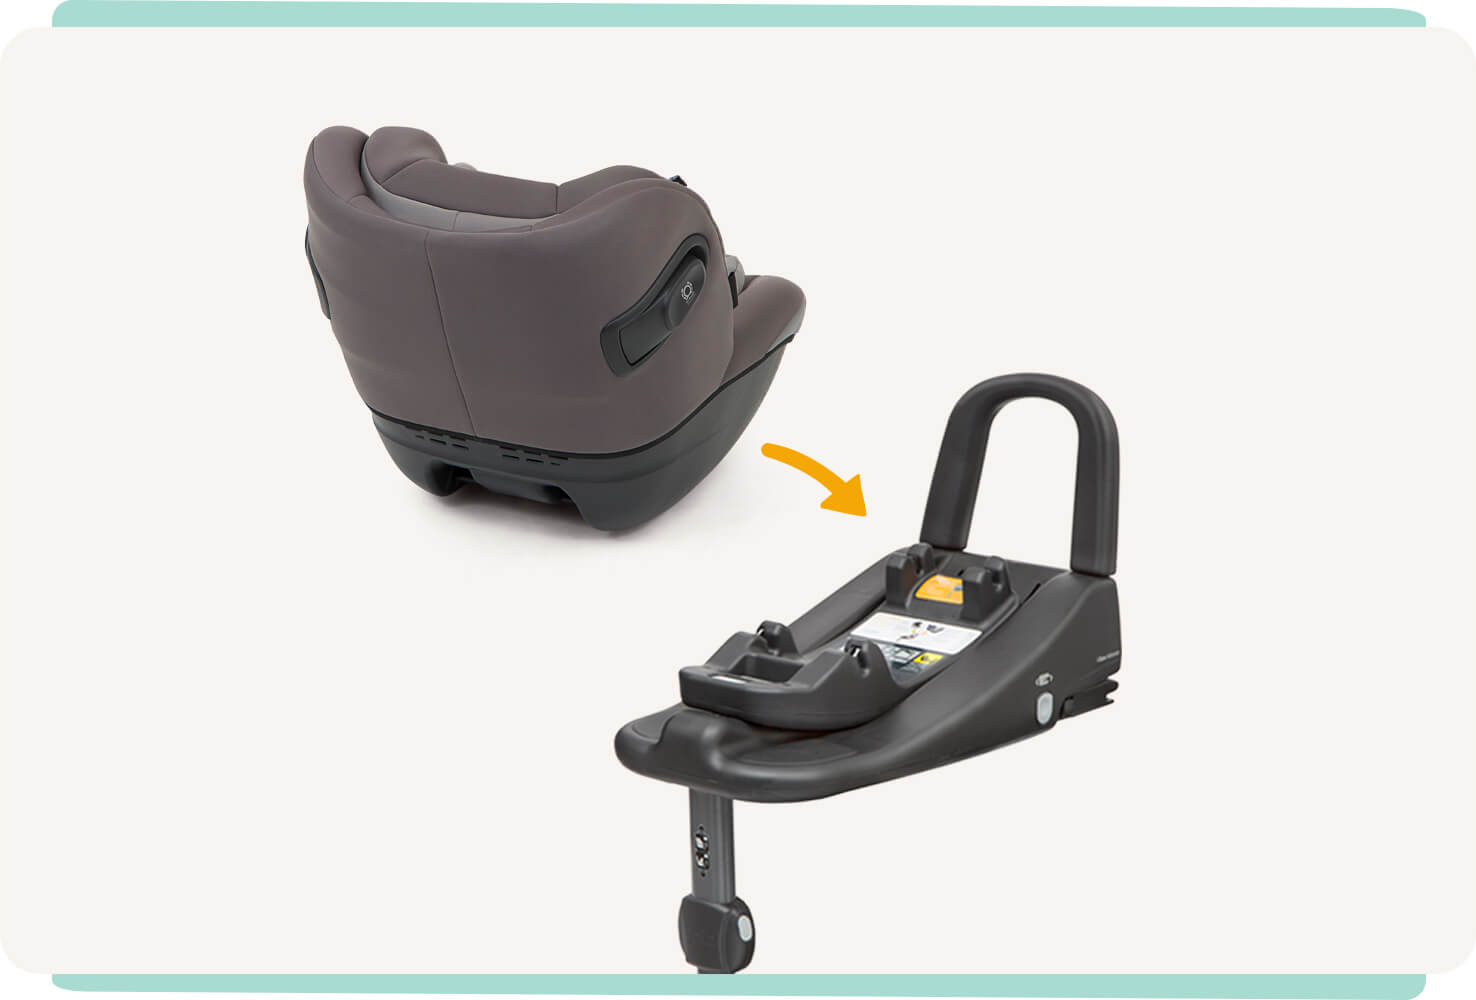 Black Joie i-Venture car seat pictured at an angle facing rearward, with an orange arrow pointing to a car seat base.